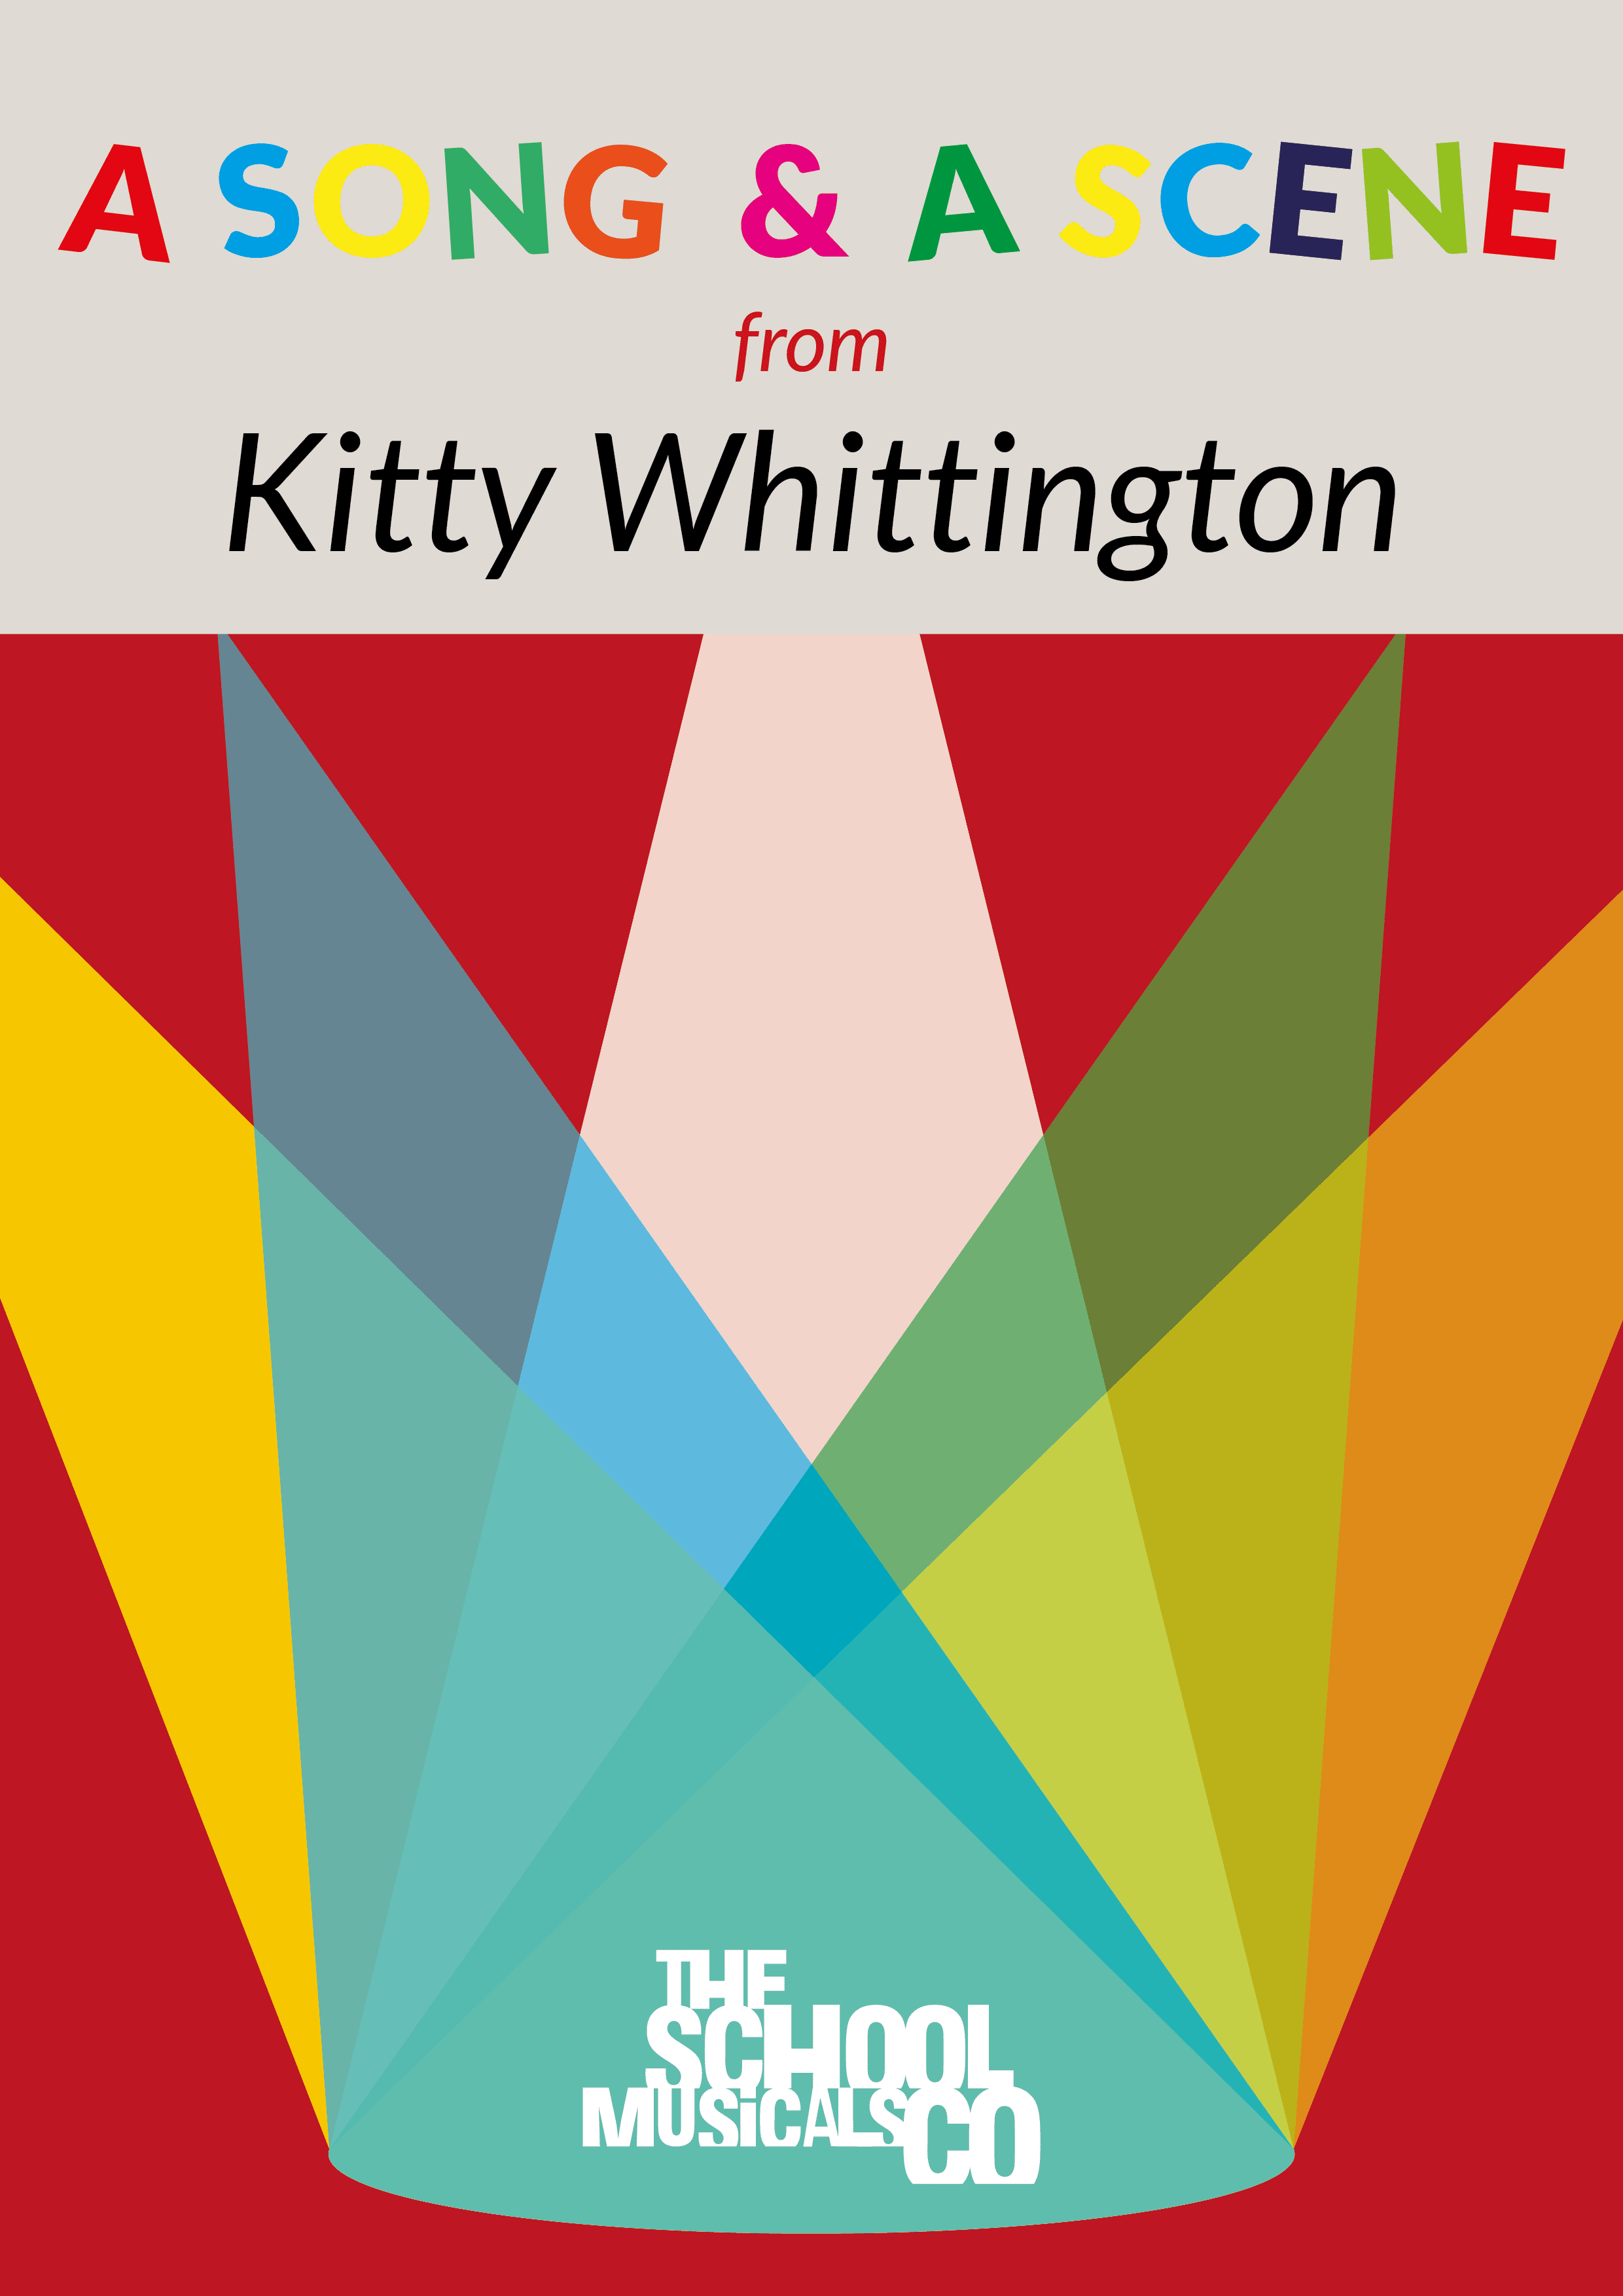 A Song & A Scene from Kitty Whittington